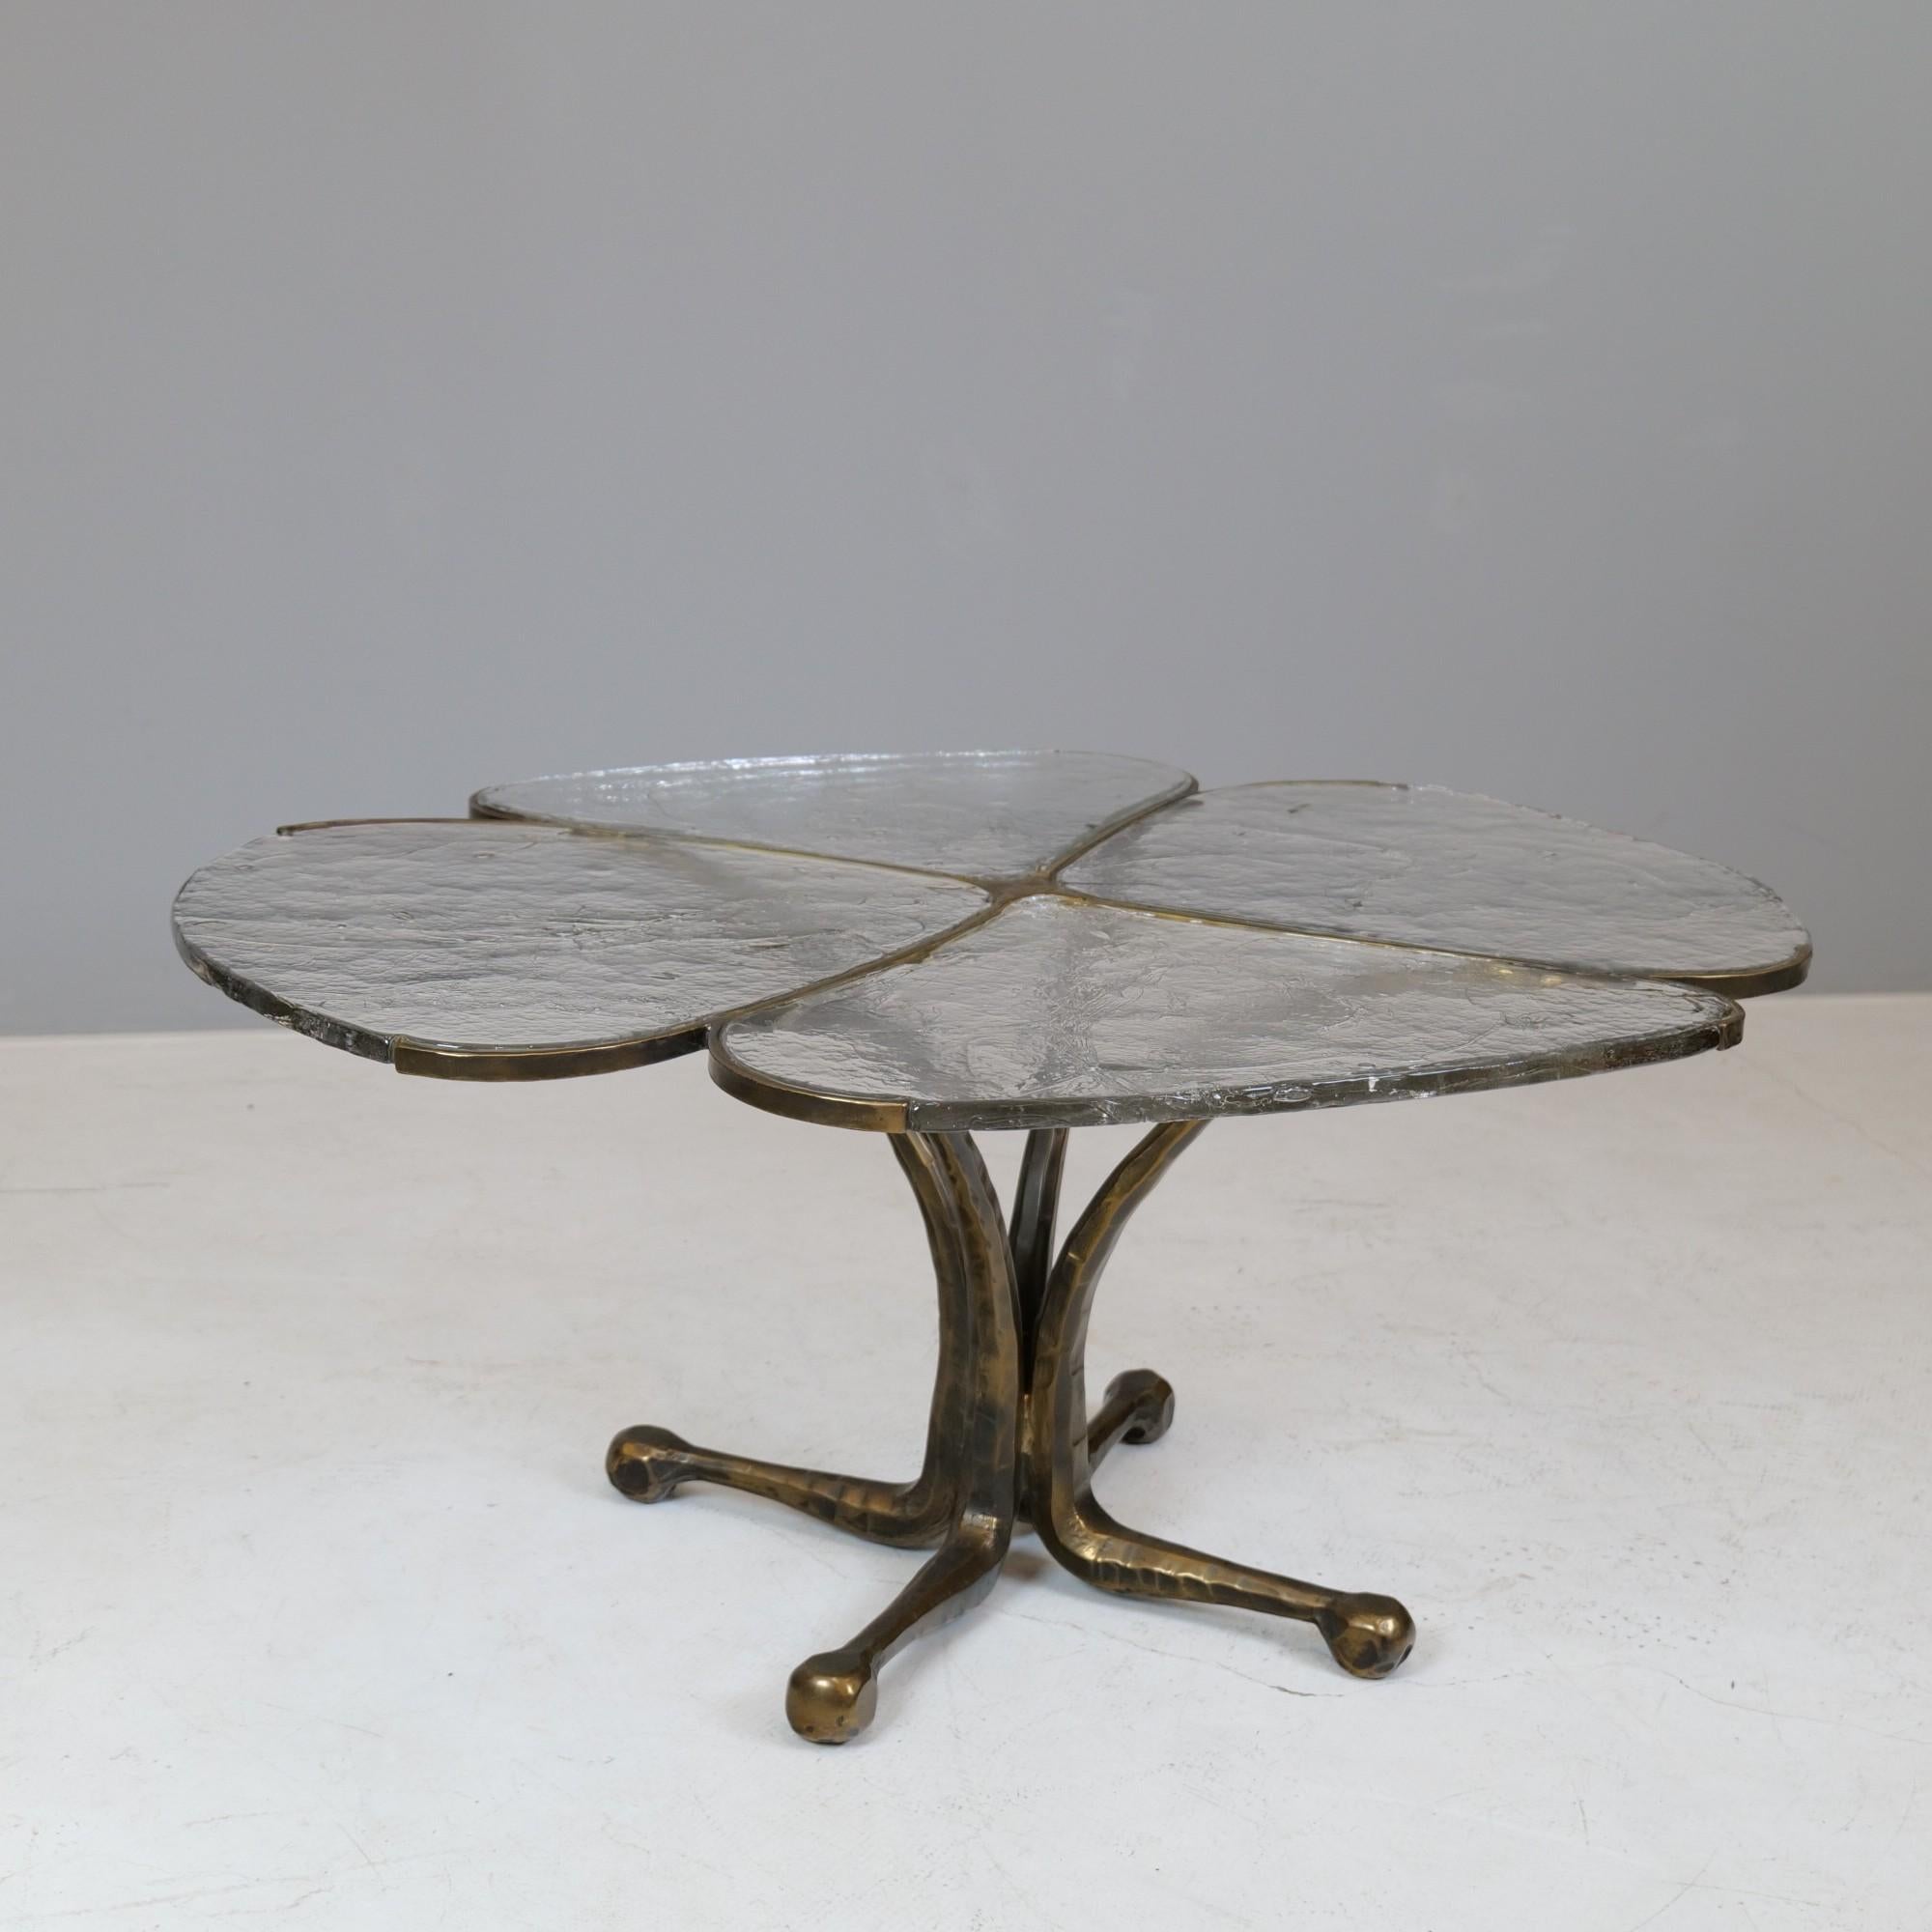 Vintage Forged Bronze Table Signed Lothar Klute, 1994 Germany For Sale 5